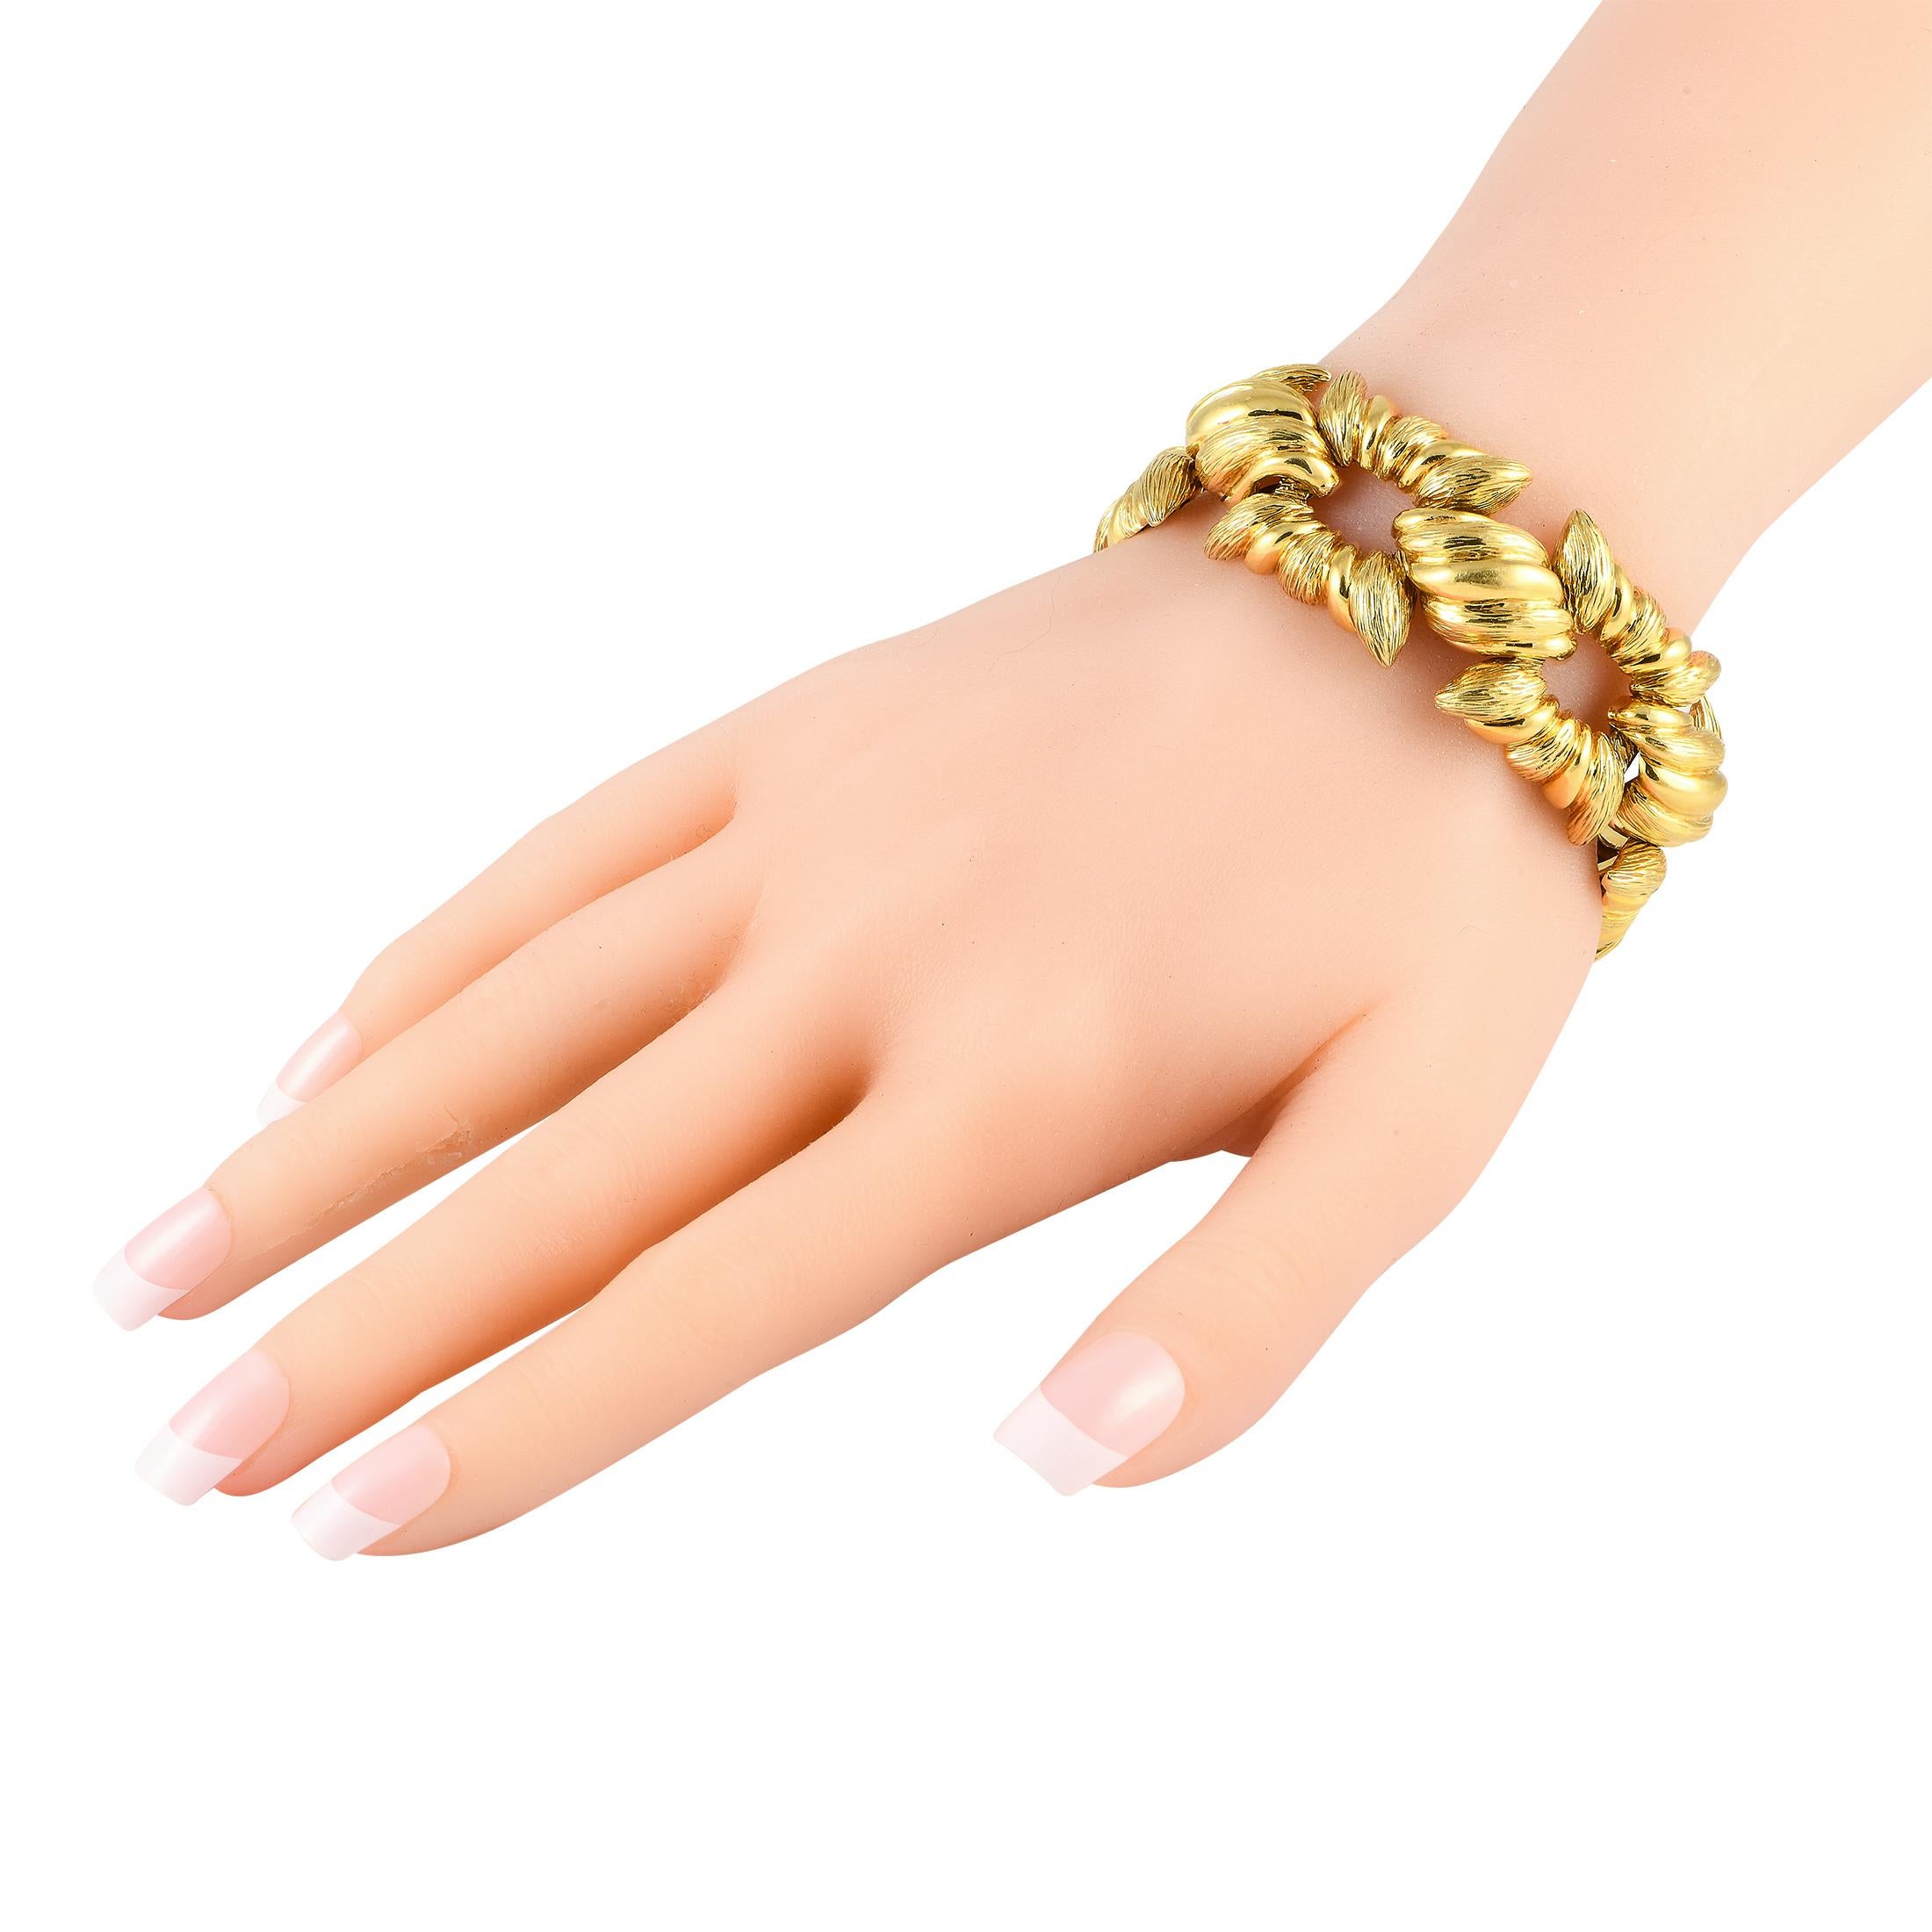 Consider this yellow gold bracelet an easy-to-wear statement piece that can instantly add dimension and texture to your accessorizing style. The bracelet features rigid and fluted square-shaped links connected by twisted shell-like links. The